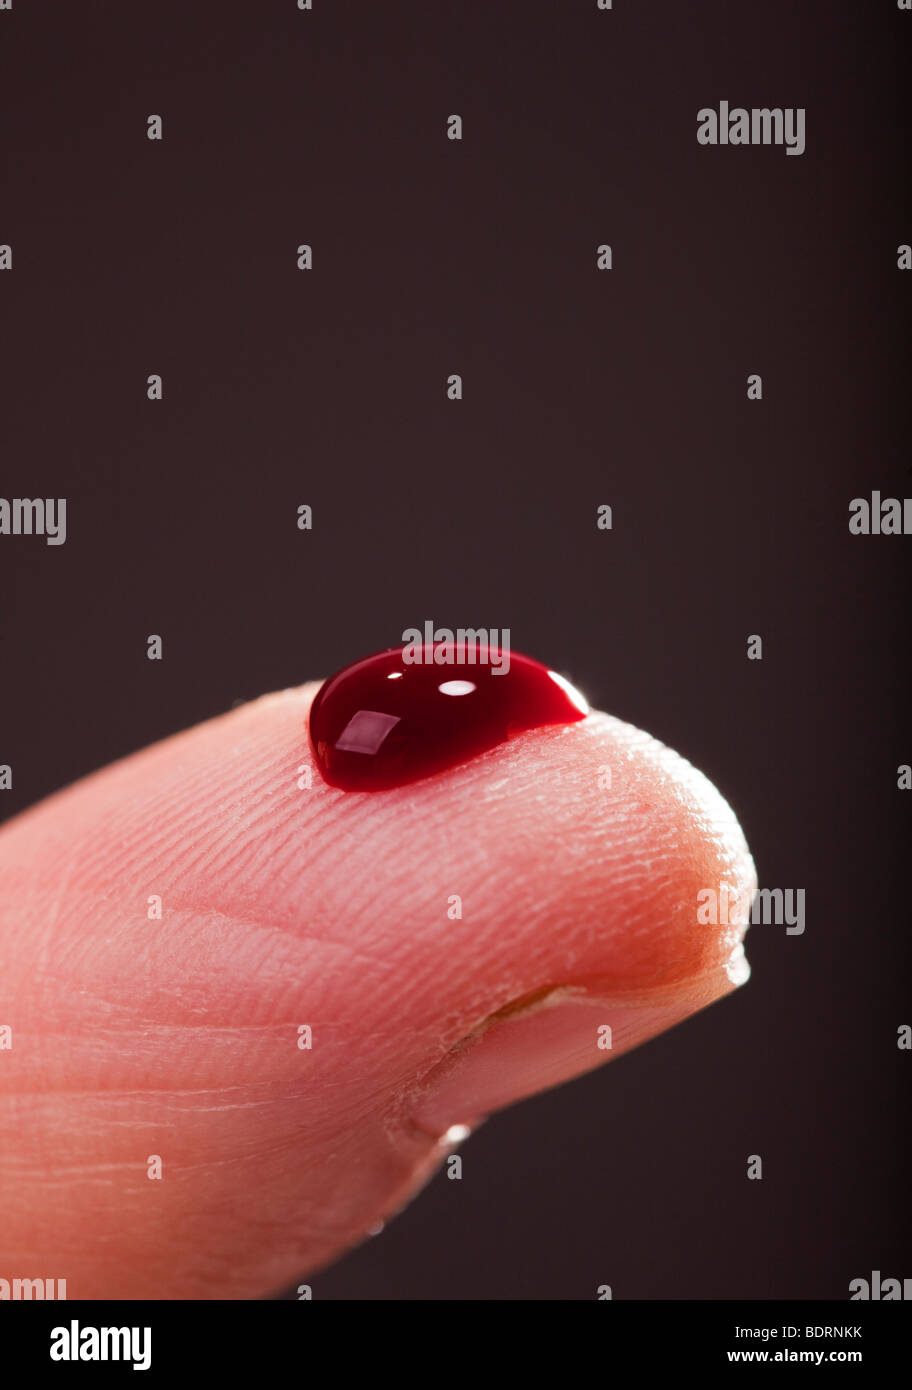 Fingertip with drop of blood. Stock Photo